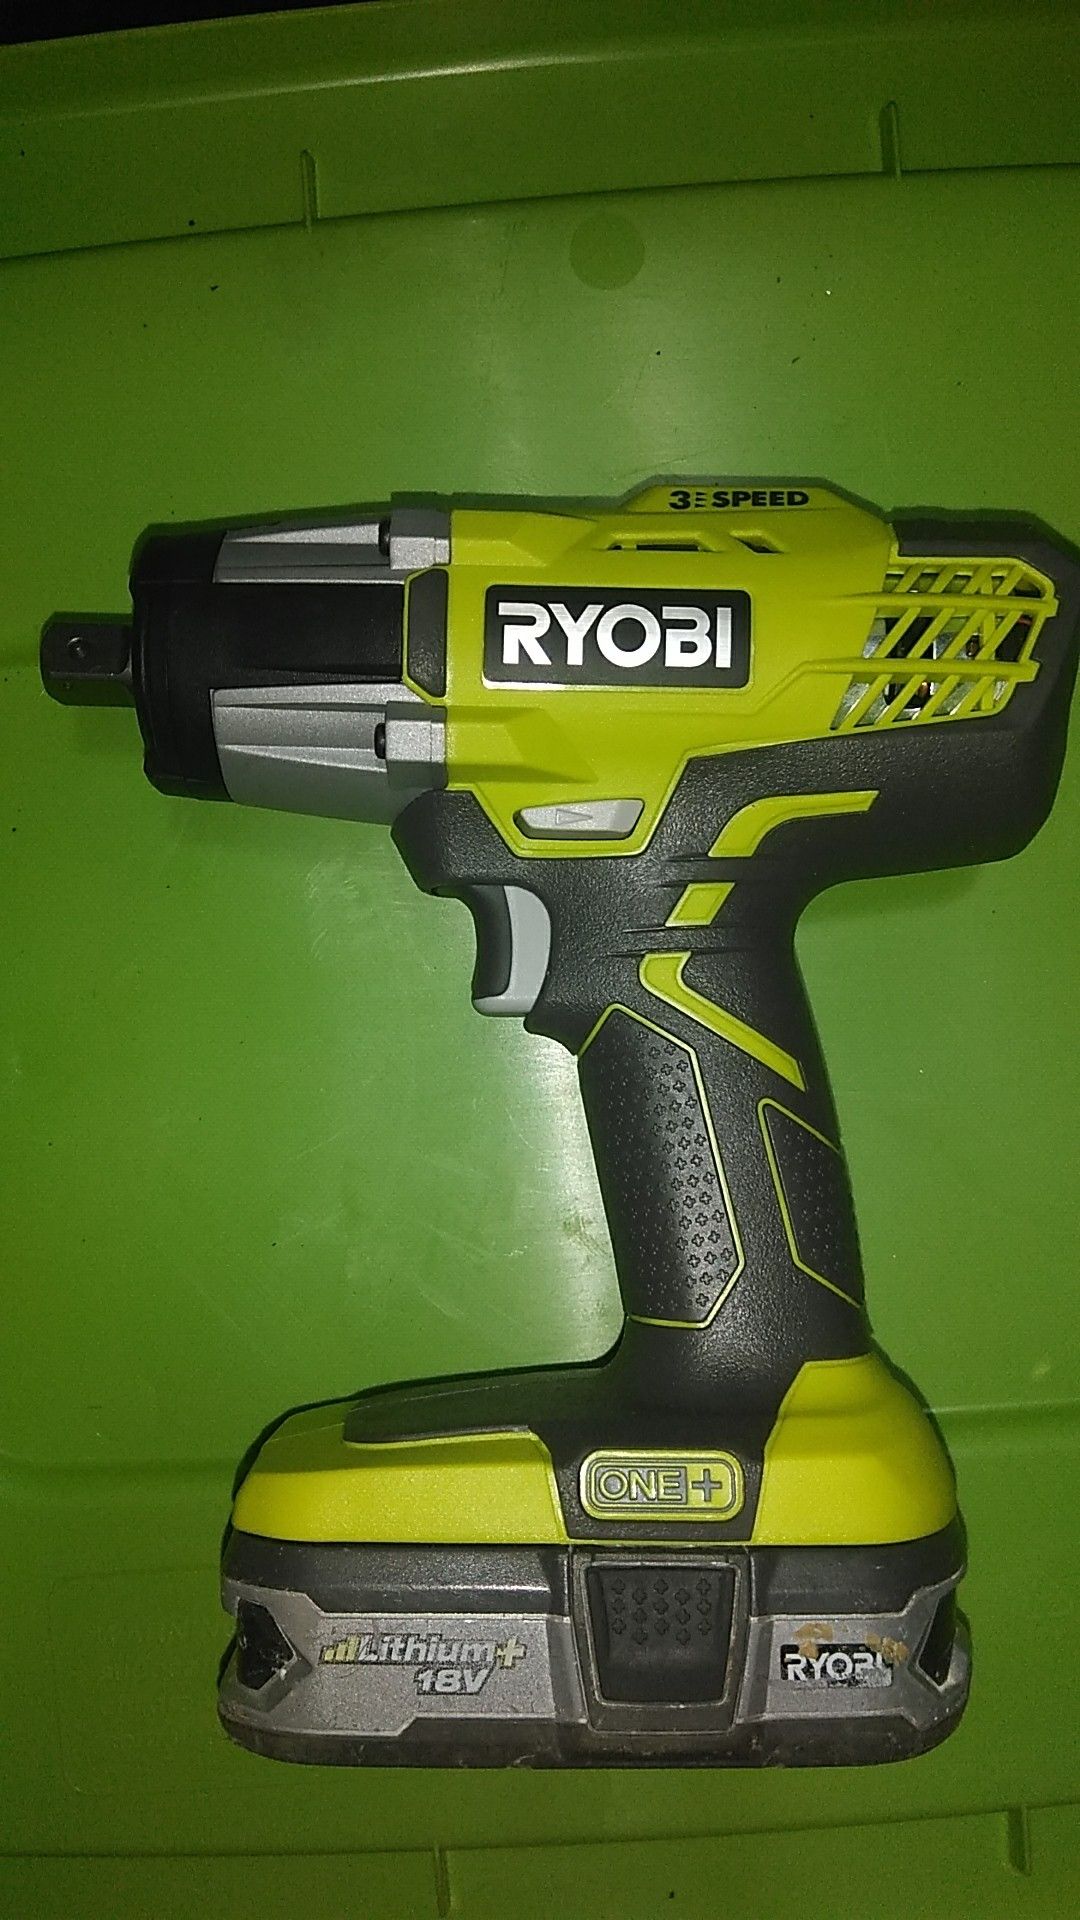 RYOBI 18-Volt ONE+ Cordless 3-Speed 1/2 in. Impact Wrench and Small Battery